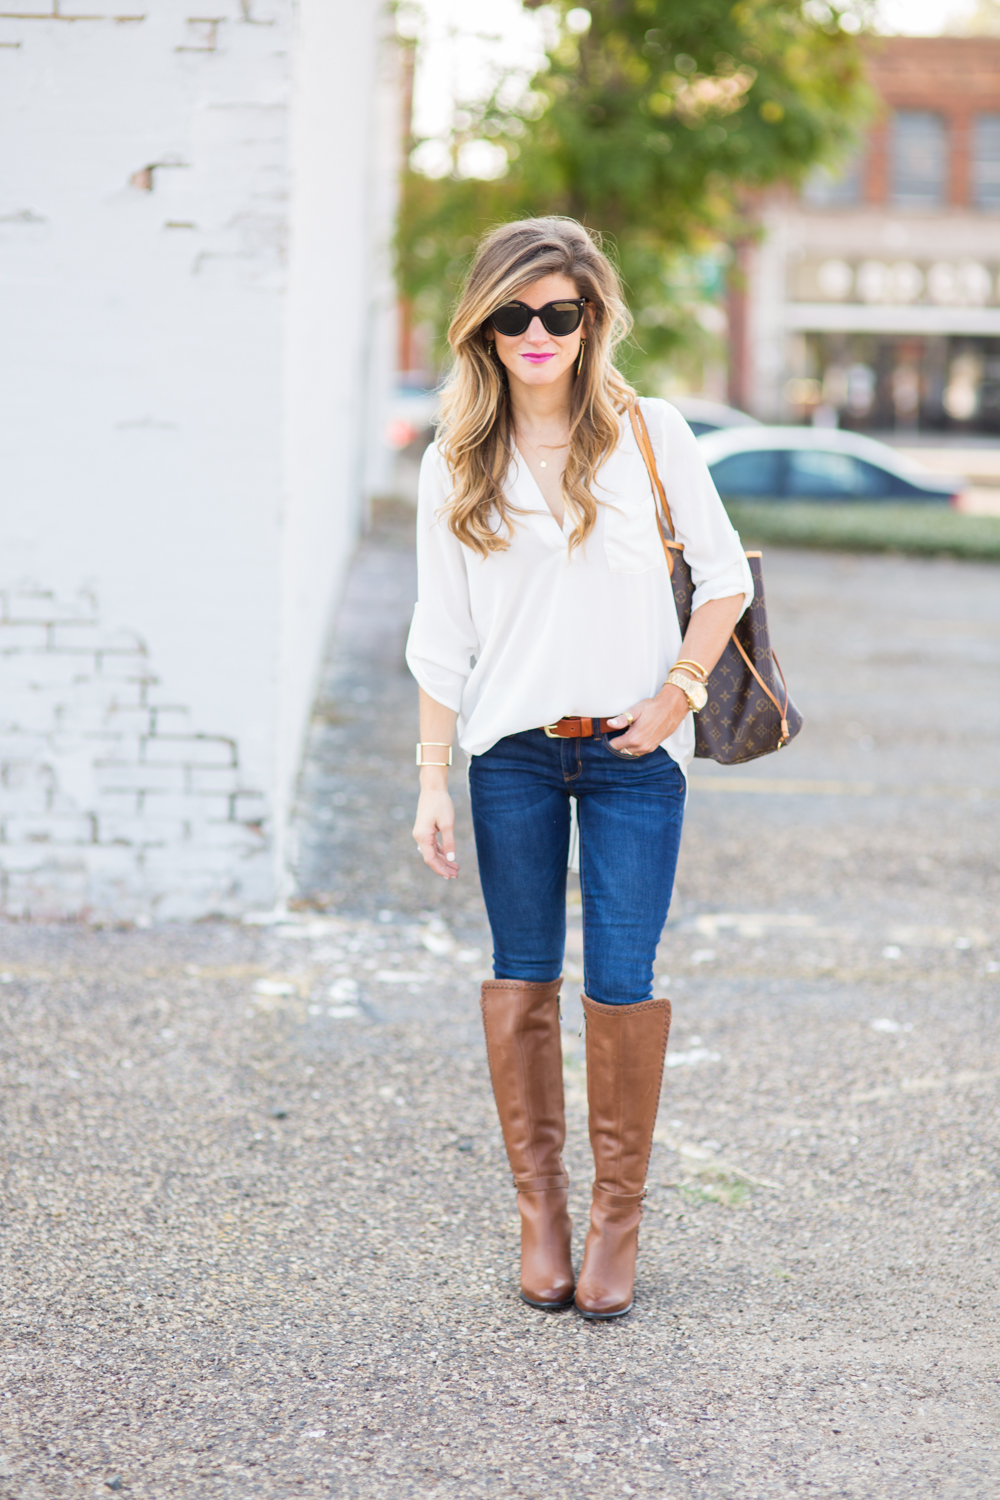 brightontheday wearing white tunic outfit with front tuck and tall brown leather boots